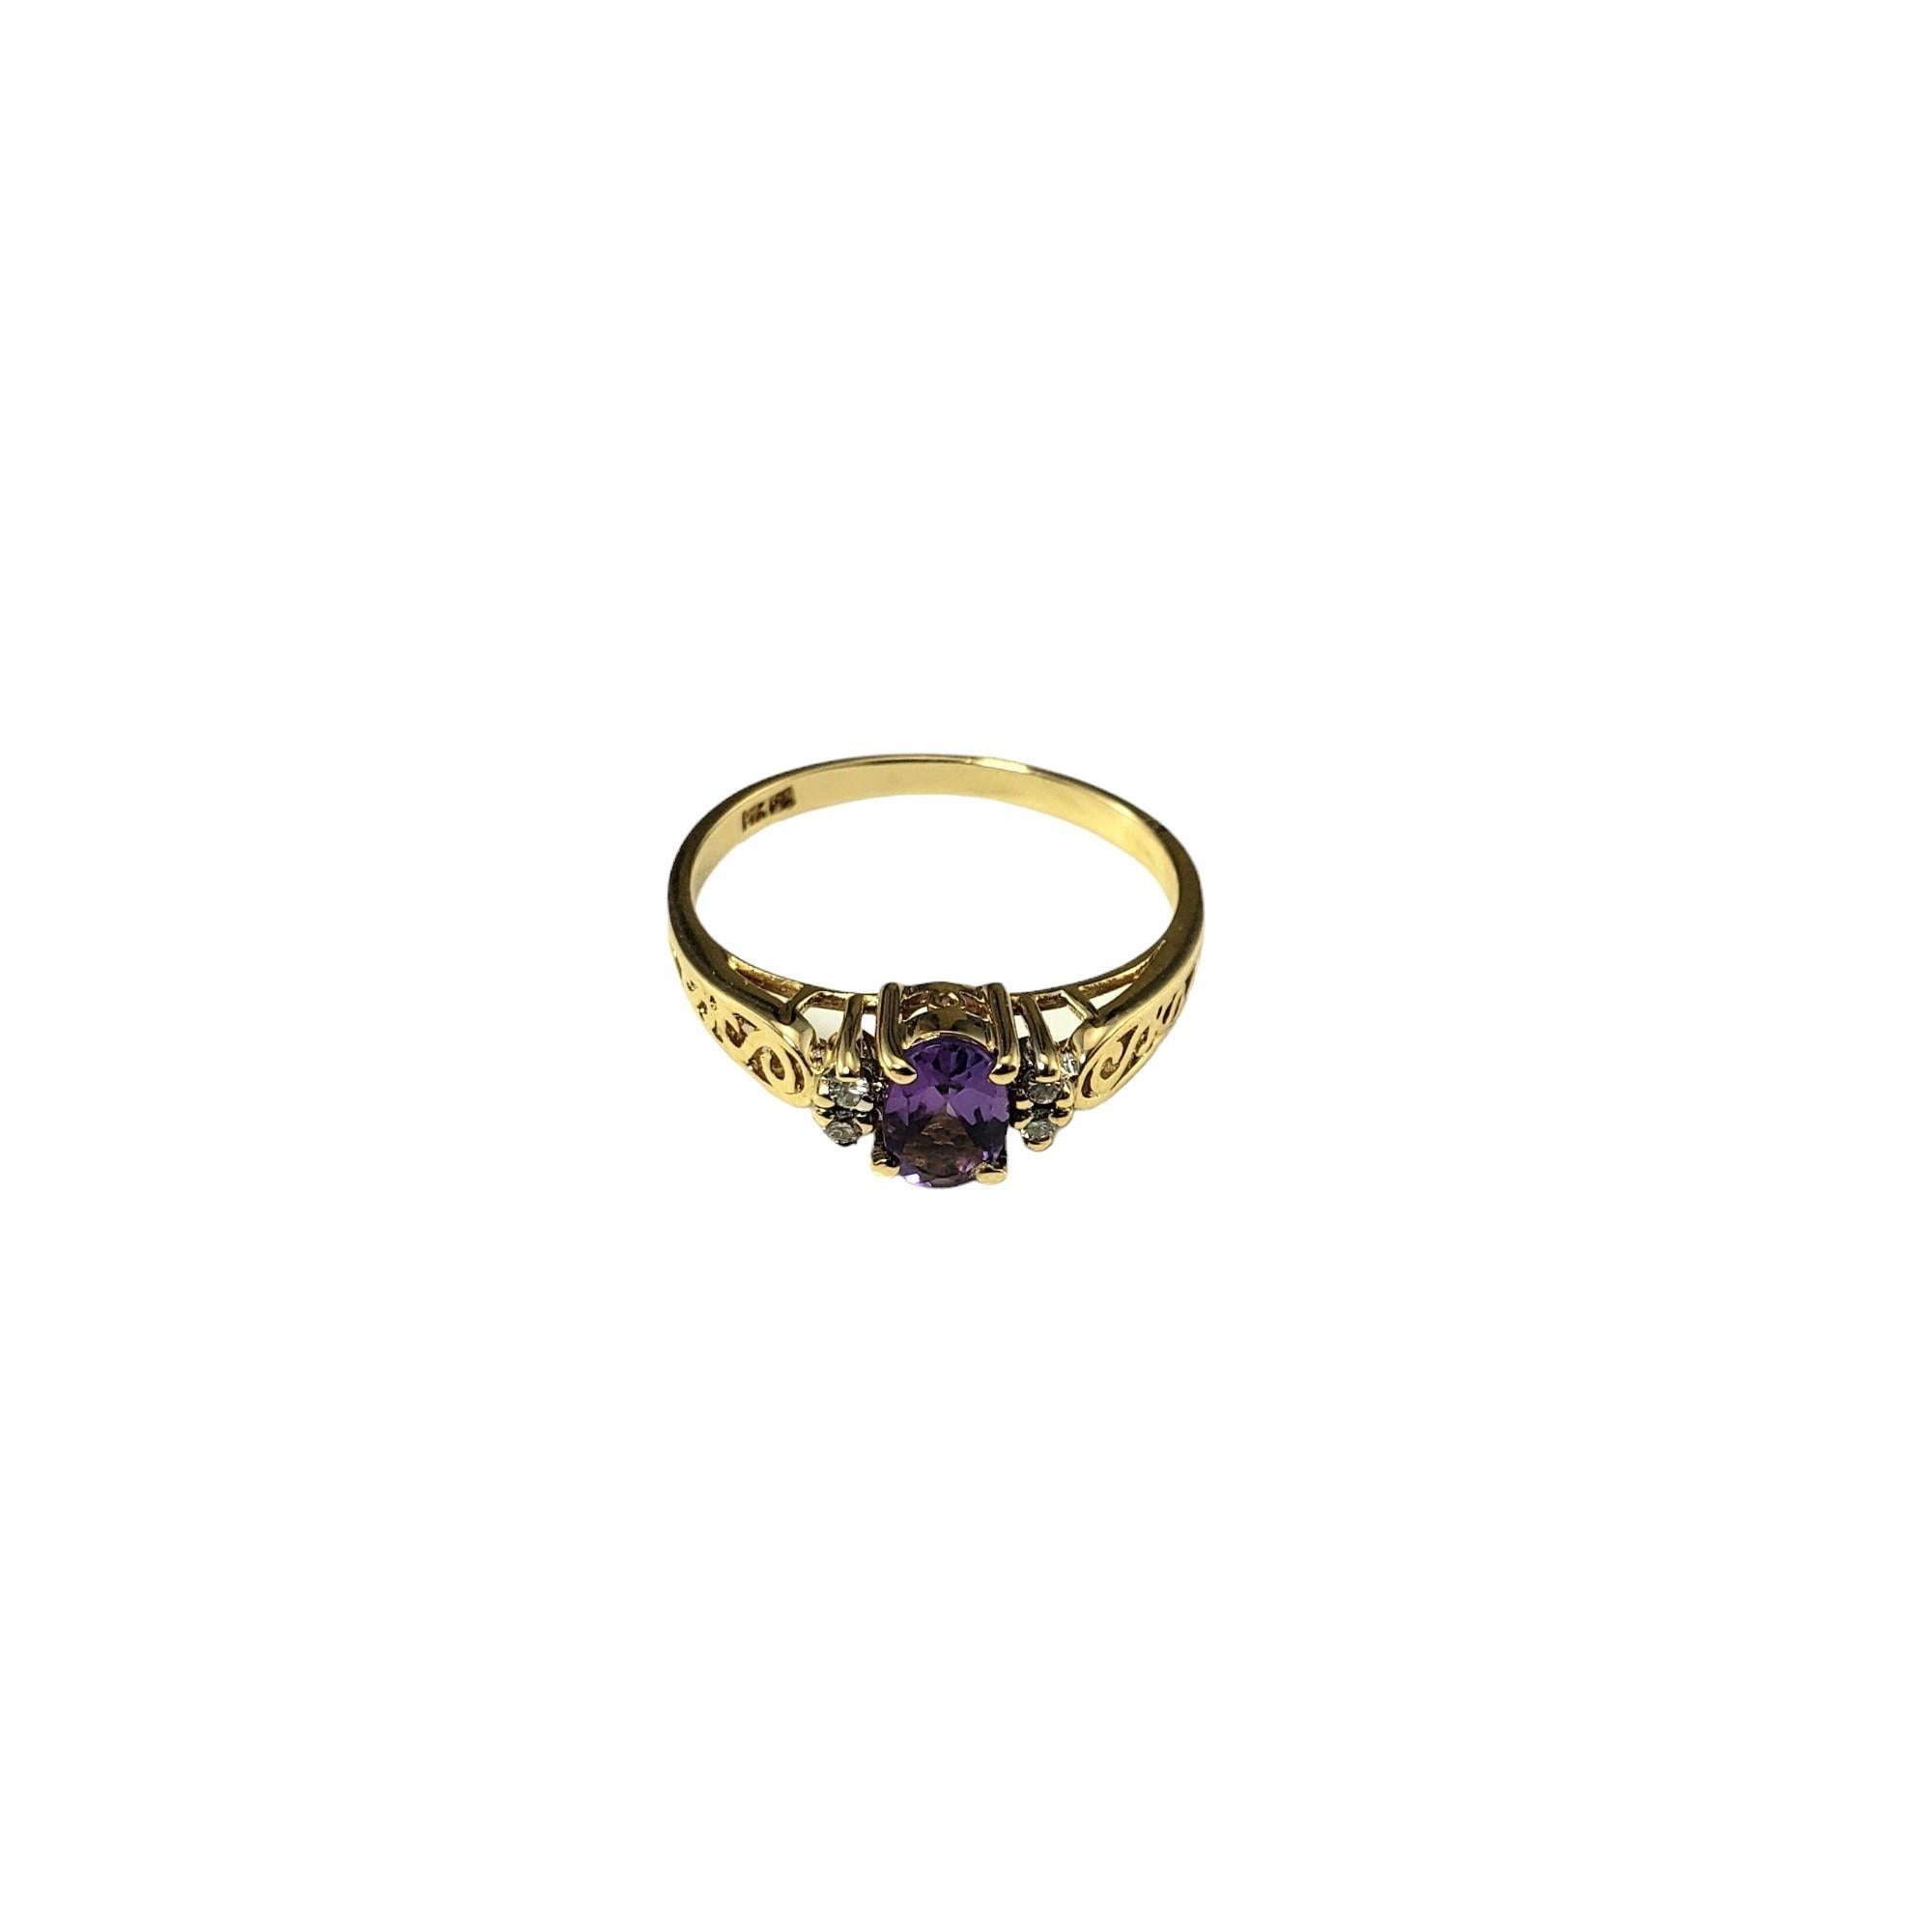 Vintage 14 Karat Yellow Gold Amethyst and Diamond Ring Size 6.5

This elegant ring features one oval amethyst gemstone (6 mm x 4 mm) and four round brilliant cut diamonds set in classic 14K yellow gold.  

Shank: 1.5 mm.

Approximate total diamond